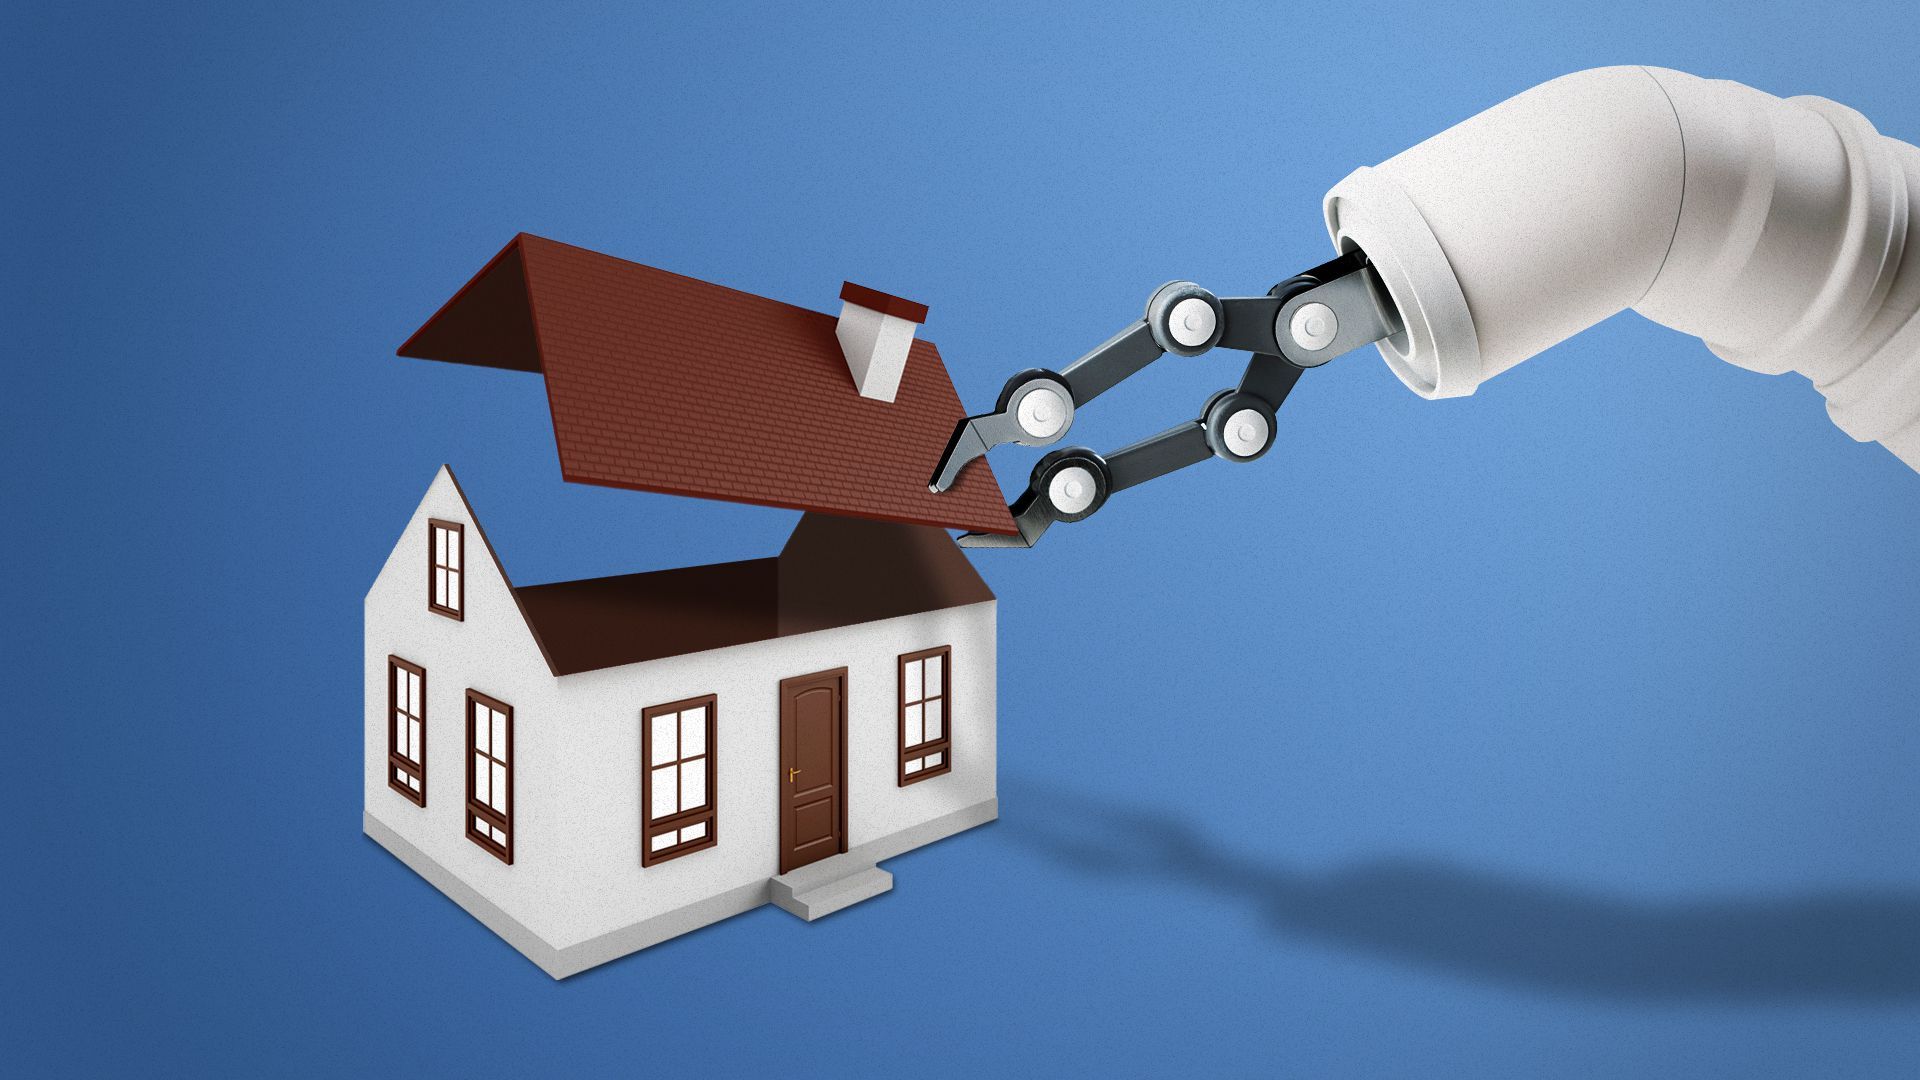 Illustration of a robotic arm placing a roof onto a house.